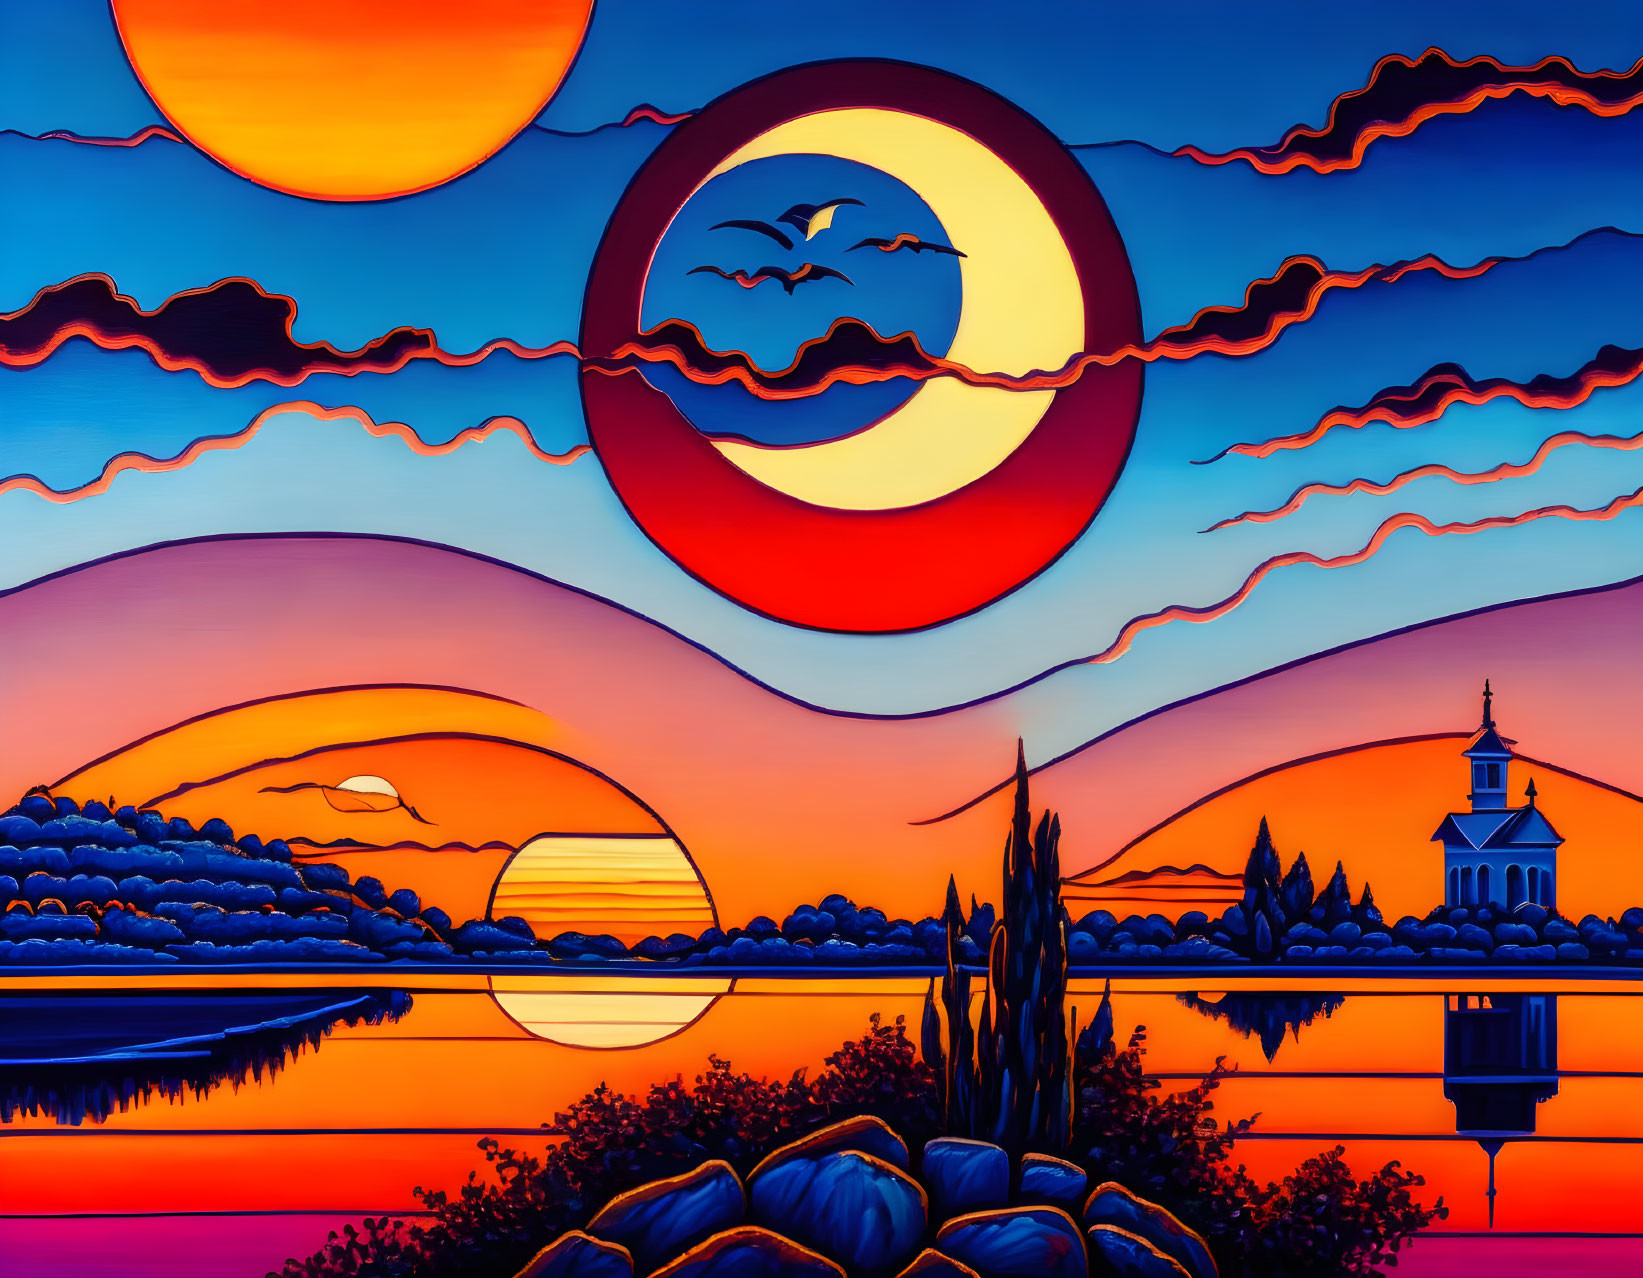 Landscape painting: Two suns, reflective water, church silhouette, trees, bird in surreal setting